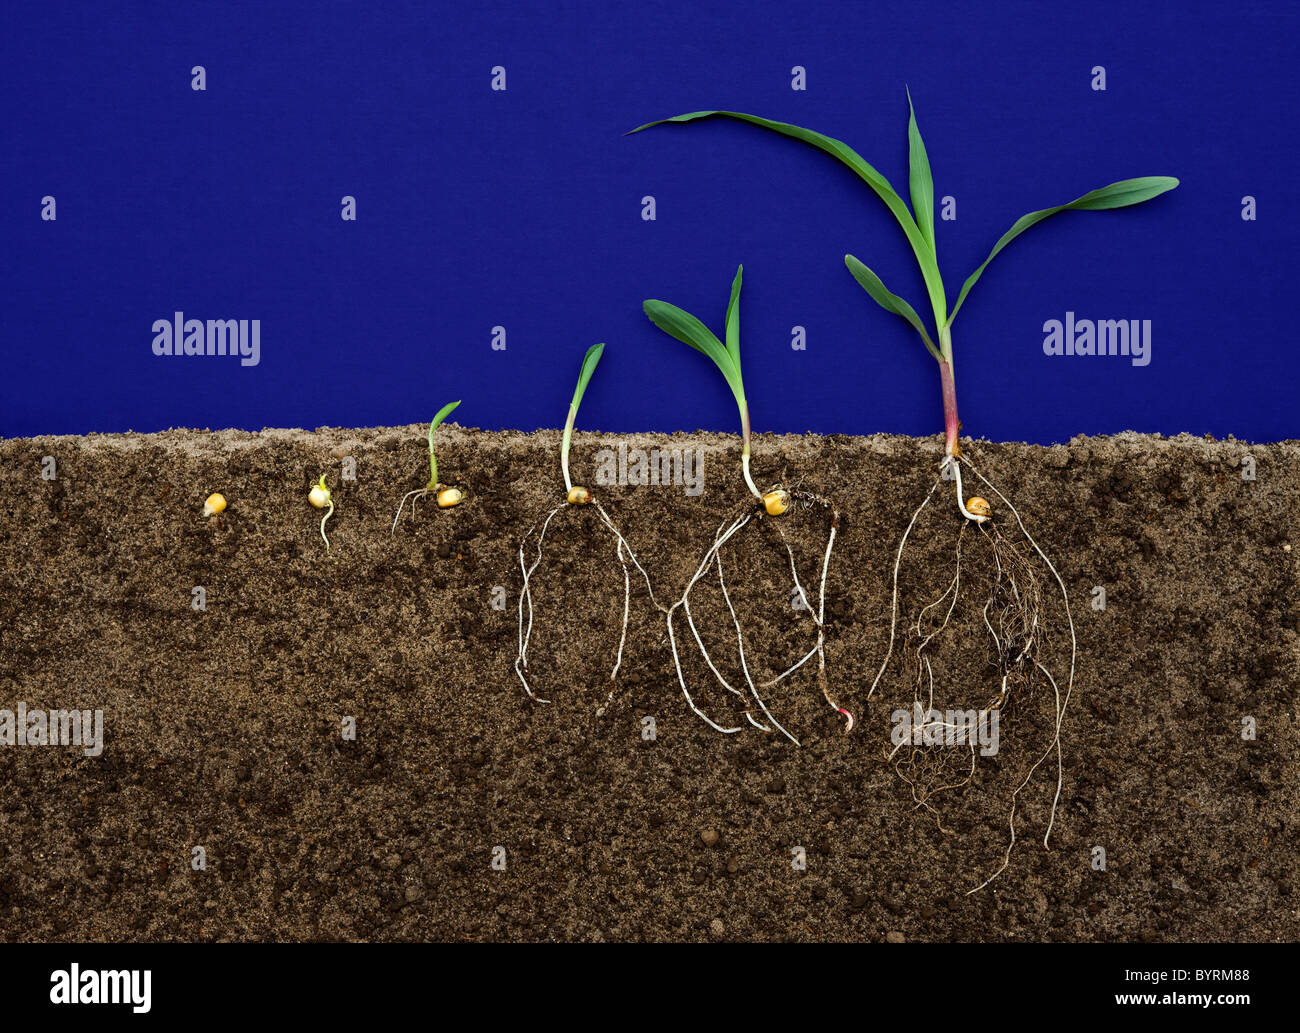 Grain corn (Zea maize) early growth development stages showing root systems. Stock Photo